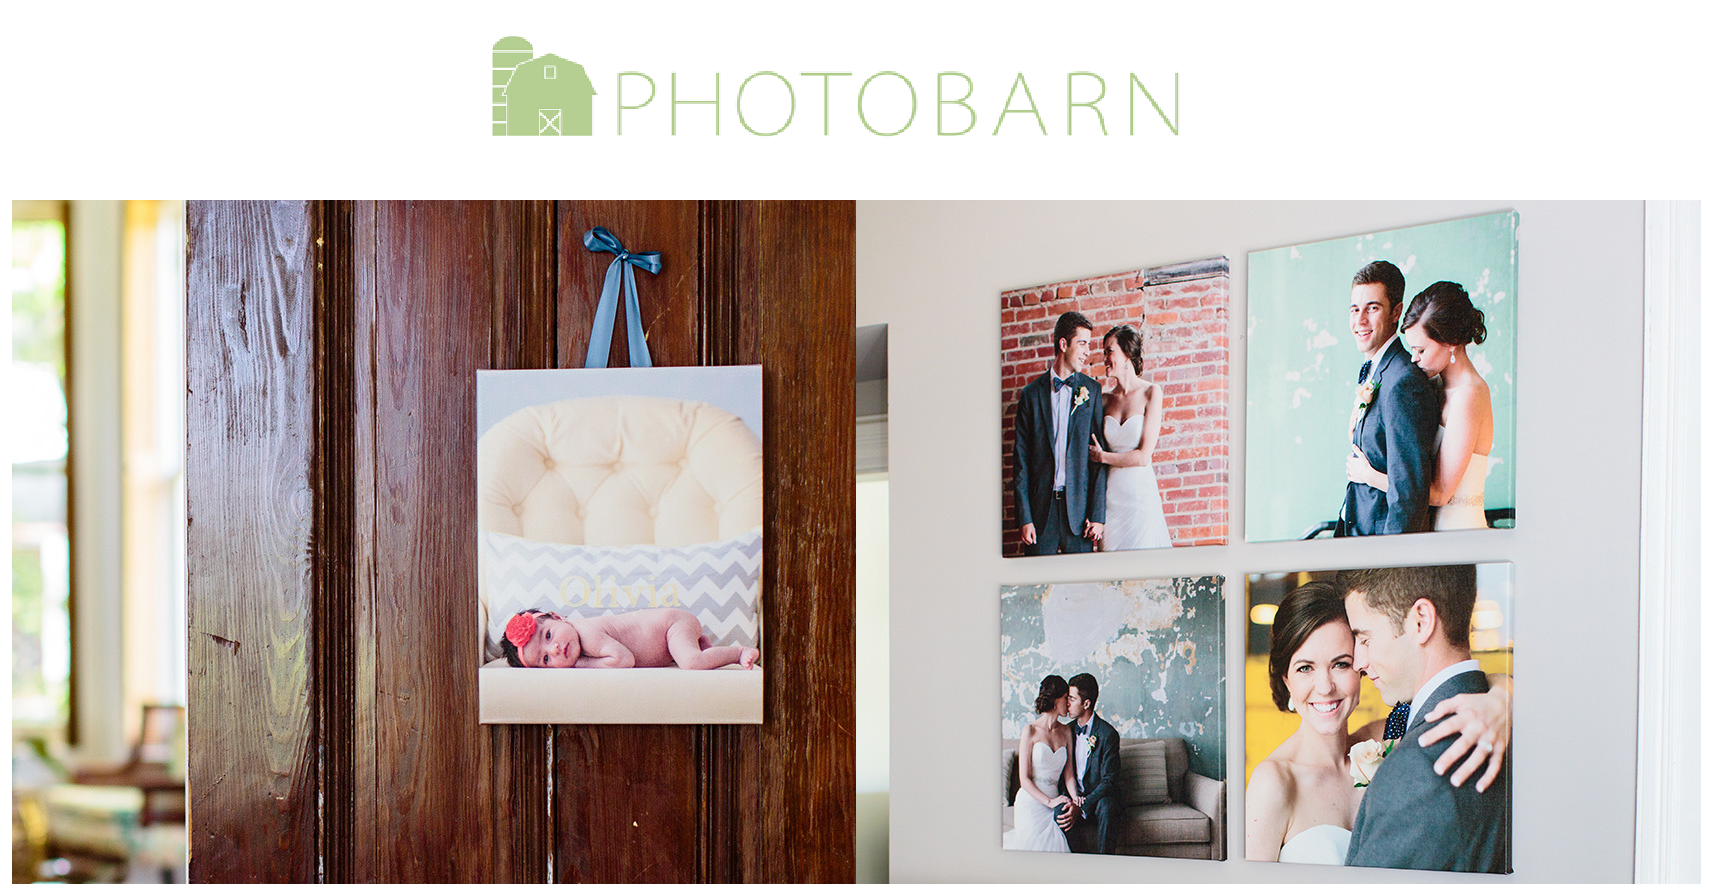 FREE 6×6 Personalized Photo Canvas From Photobarn – No Limits! (Just Pay $9.99 Shipping)